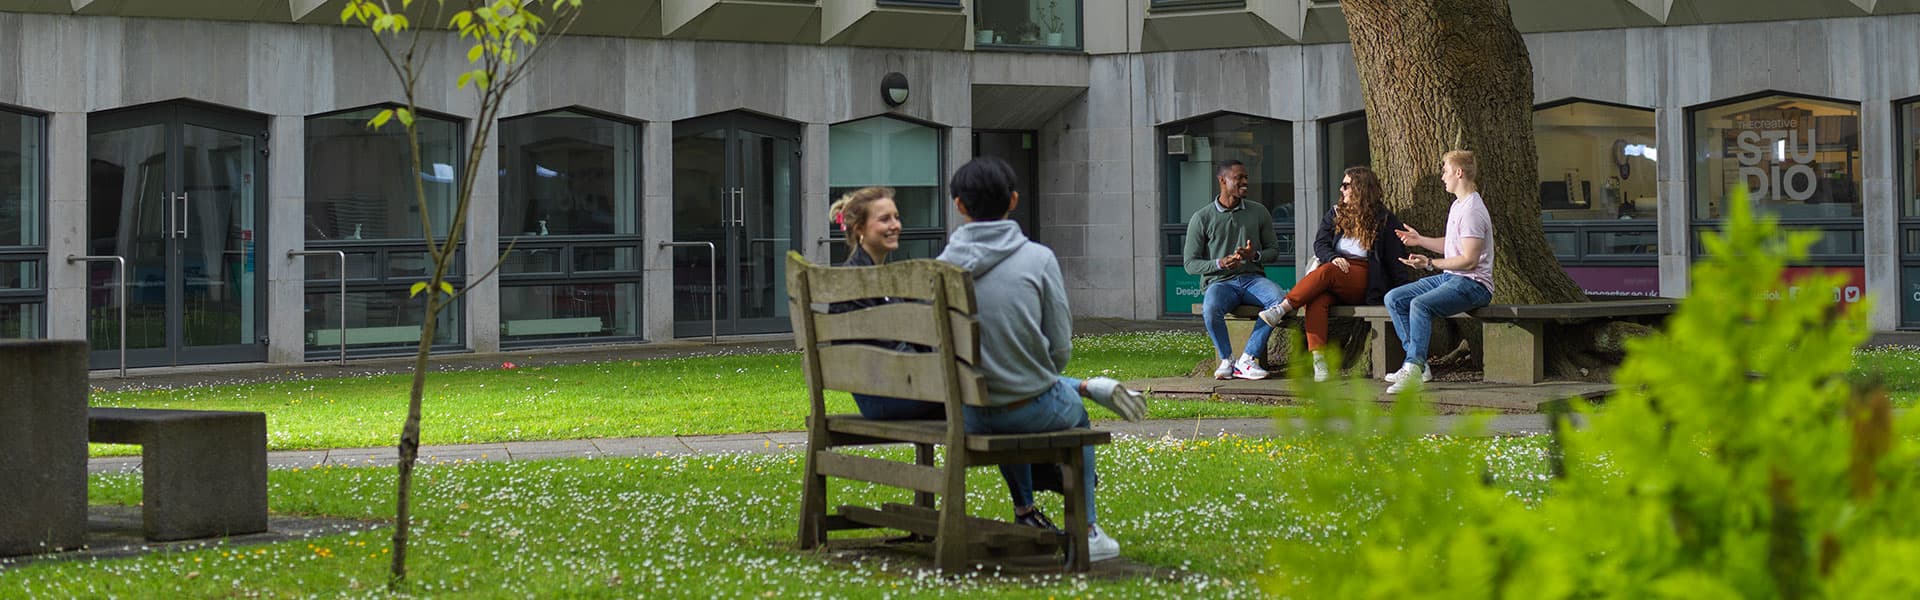 Students sit and chat in a leafy quad on a sunny day